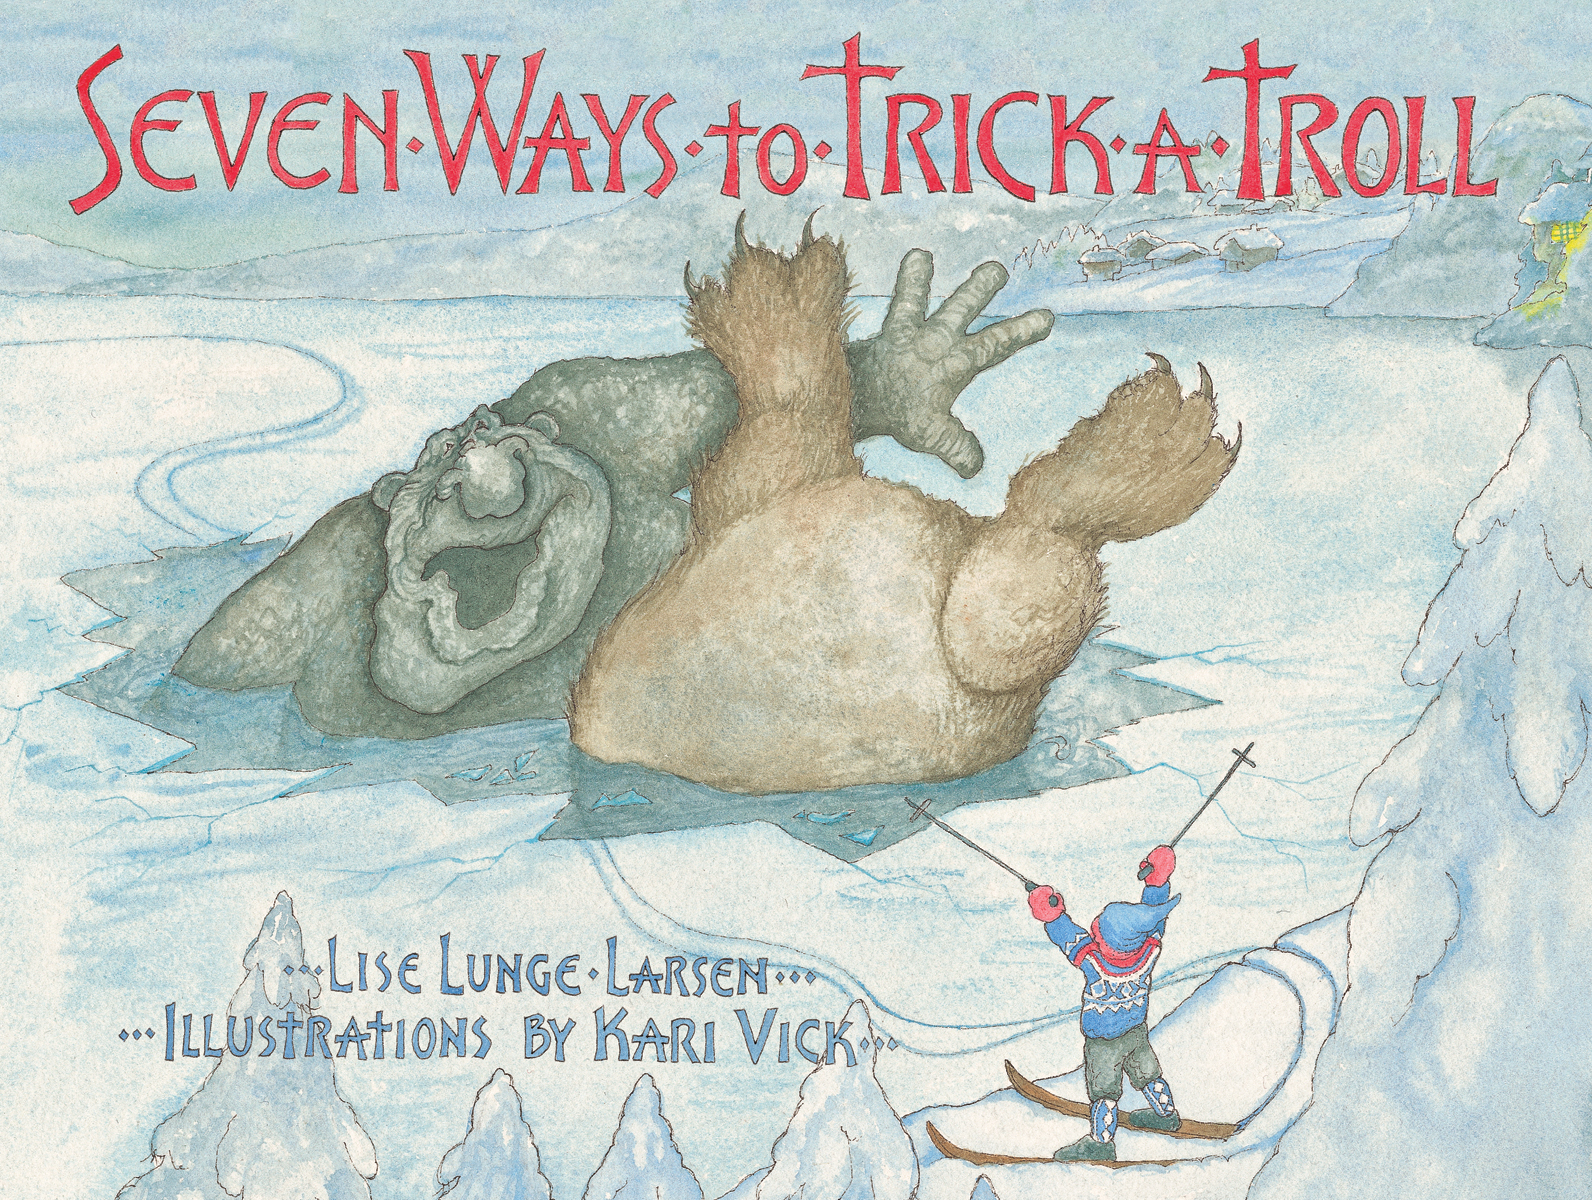 Seven Ways to Trick a Troll by Author Lise Lunge-Larsen and Artist
Kari Vick